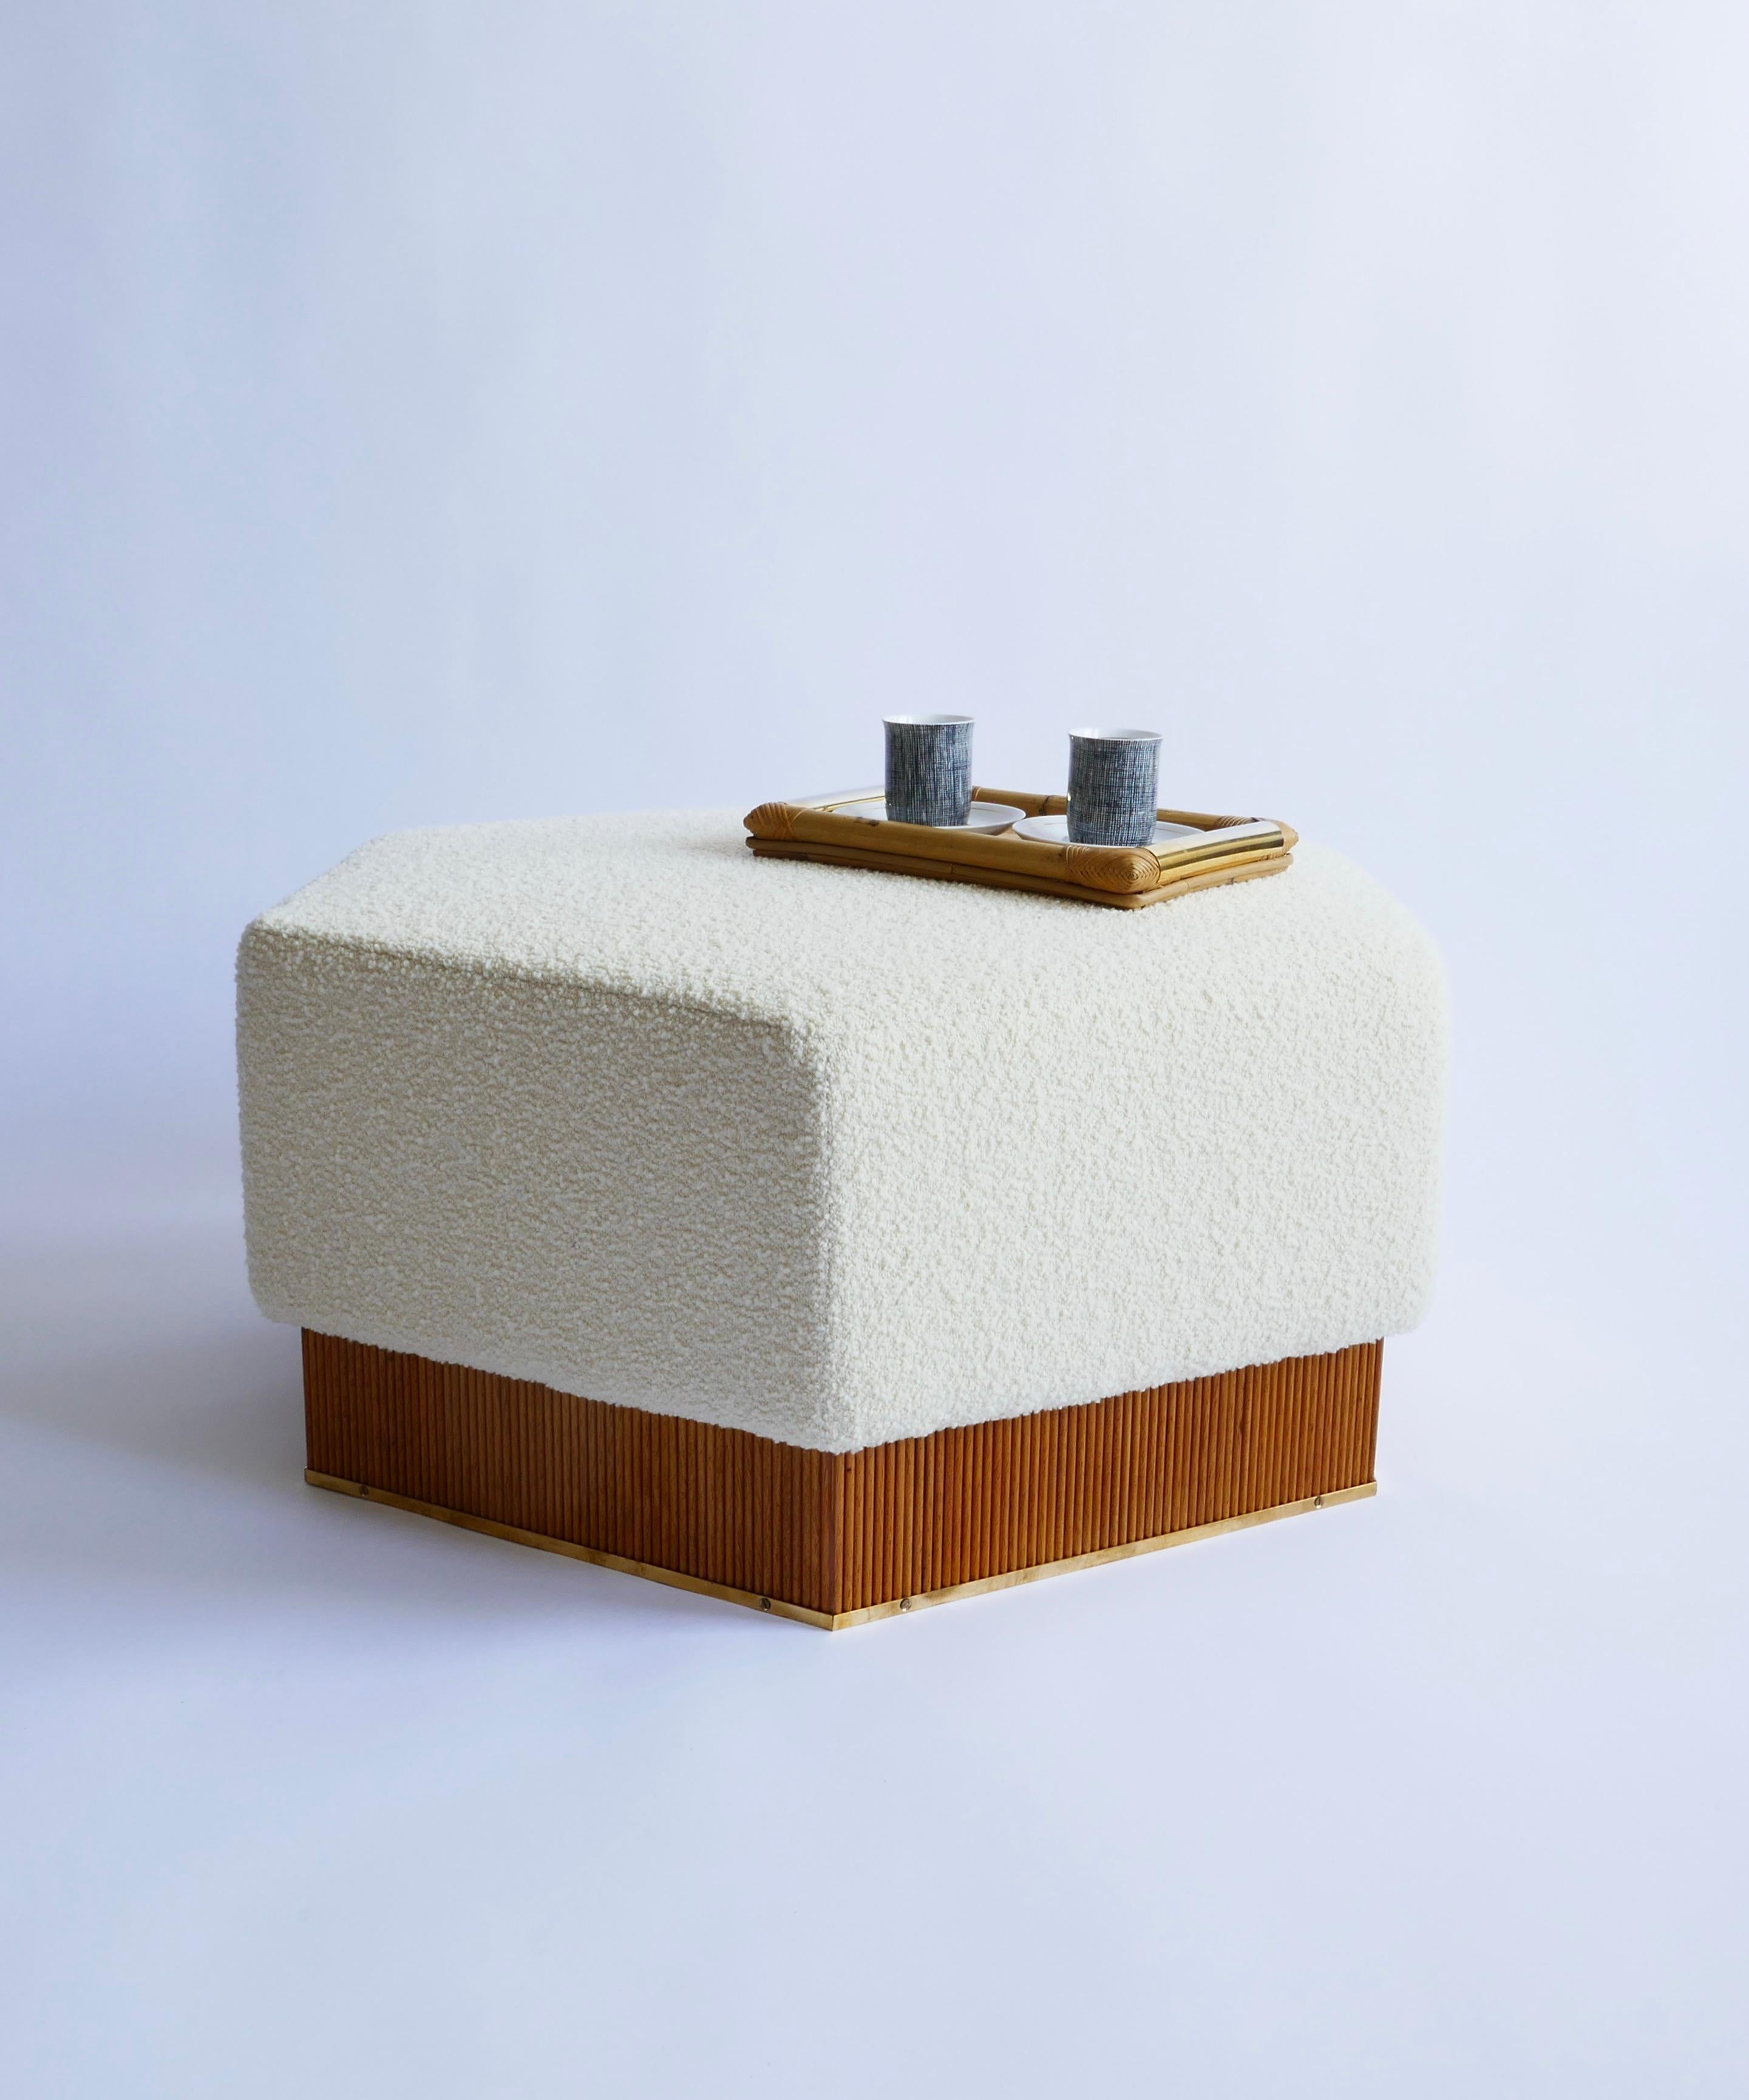 Contemporary Hexagonal Pouf in Soft White Boucle with Wooden Base, Italy